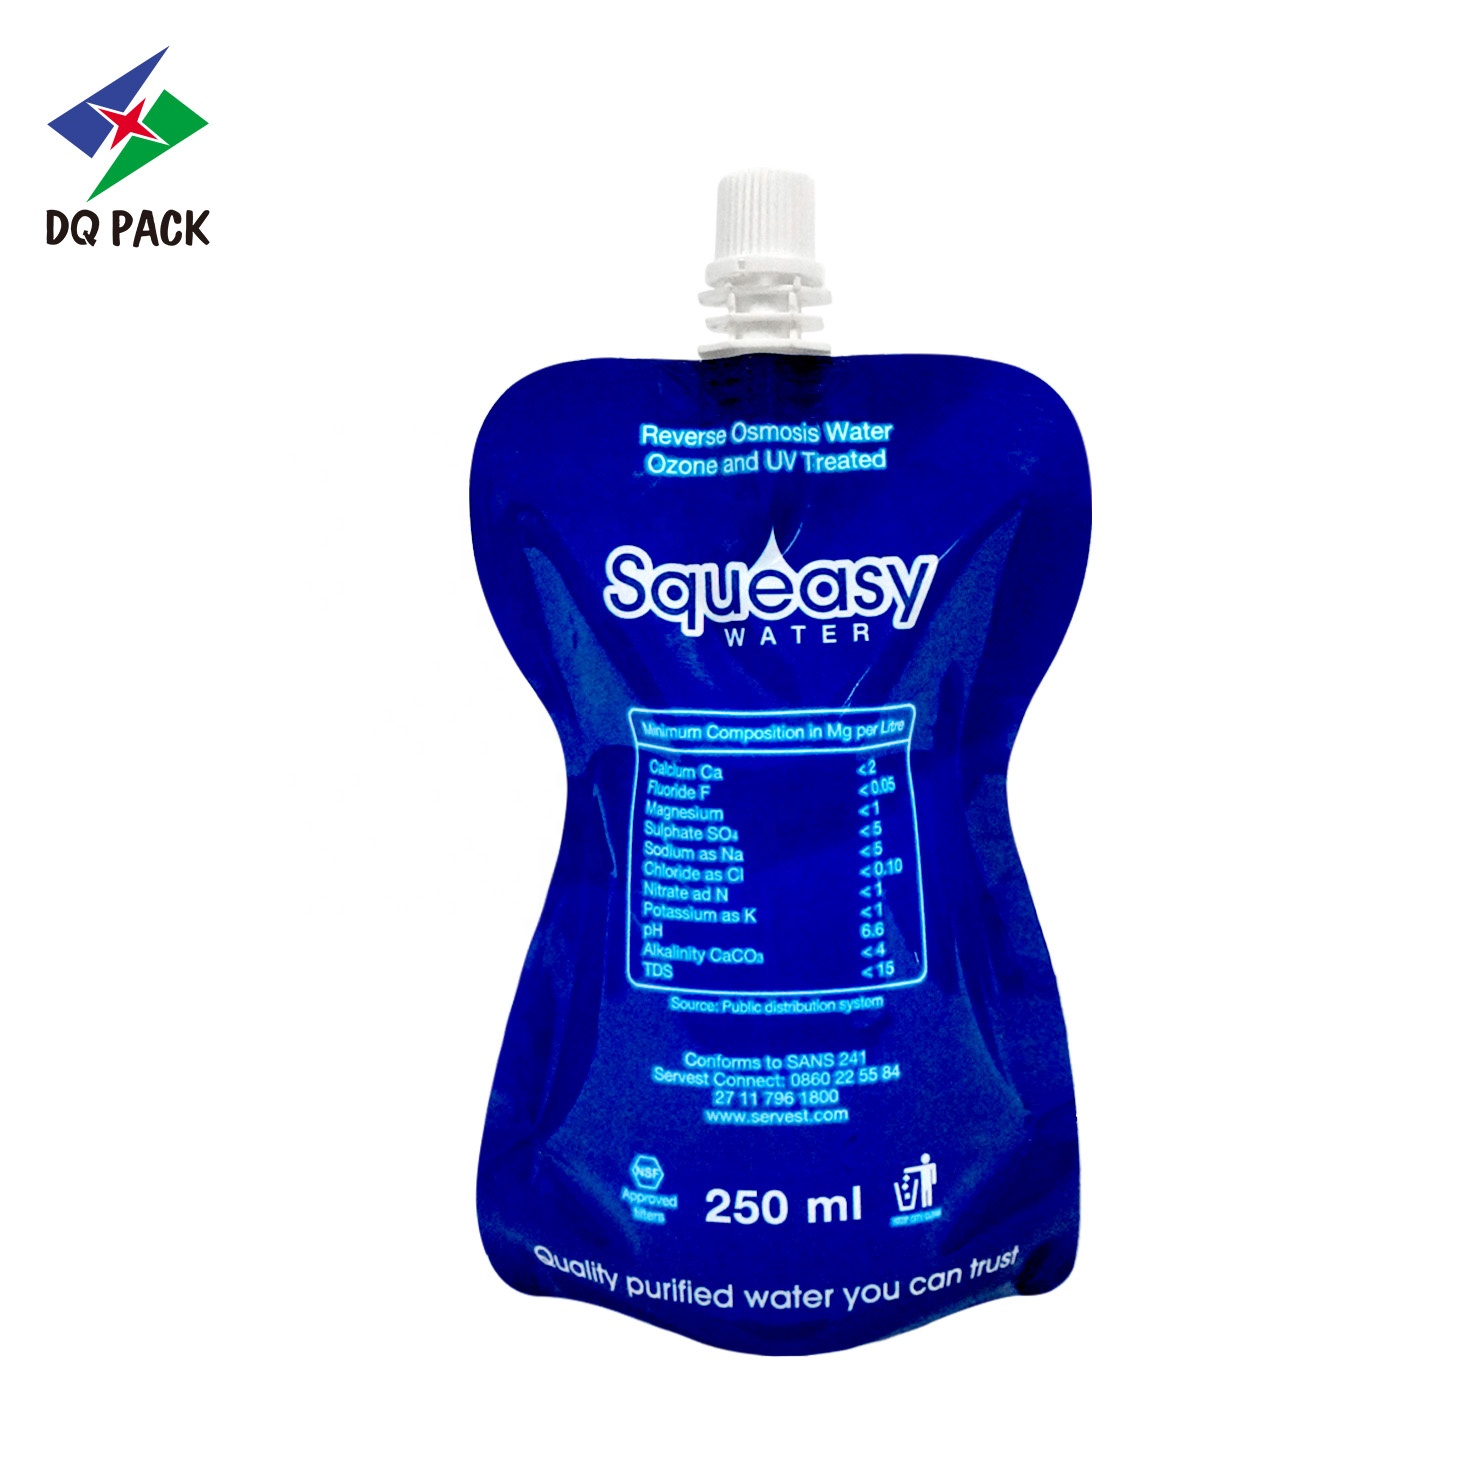 DQ PACK Customized Printing Plastic Stand Up Spout Pouch For Water Packaging 250ML Liquid Poly Bag